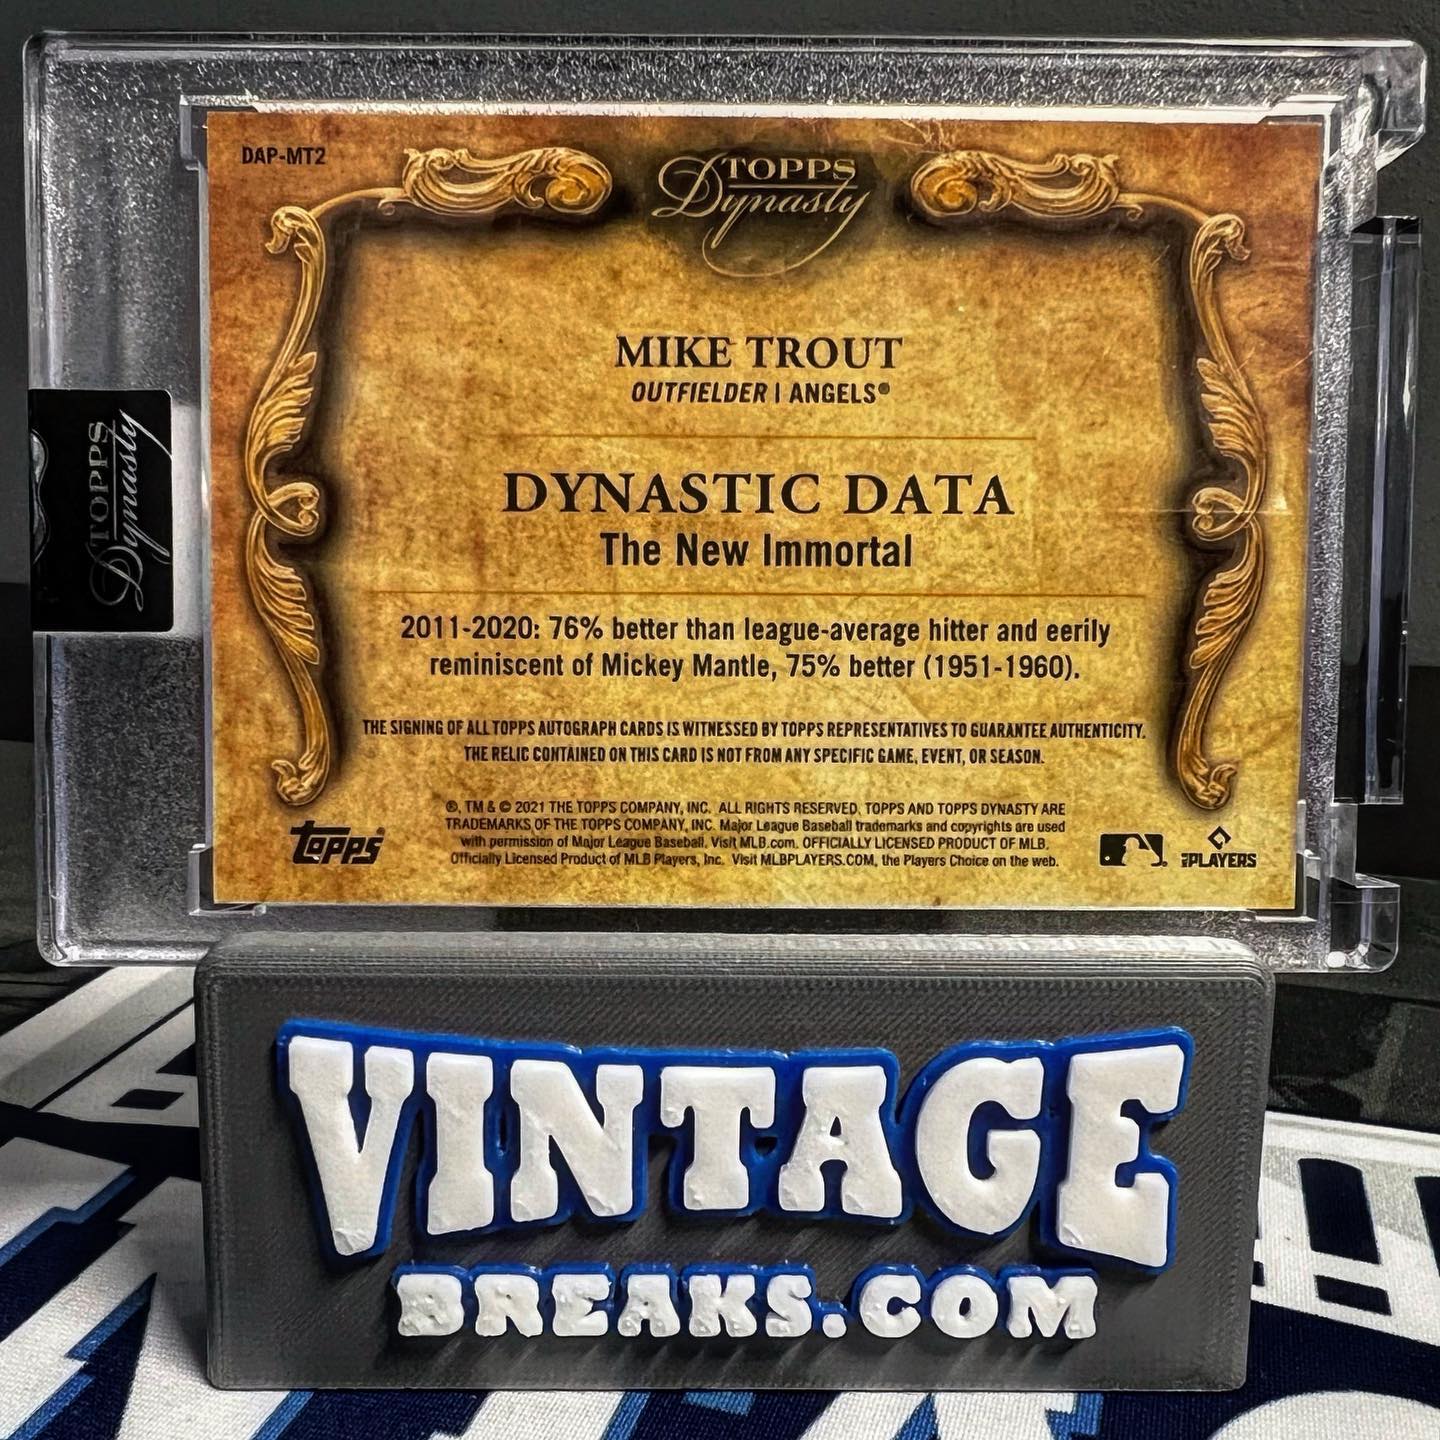 Mike Trout 1/1 Topps Dynasty Patch Auto Pulled by Vintage Breaks